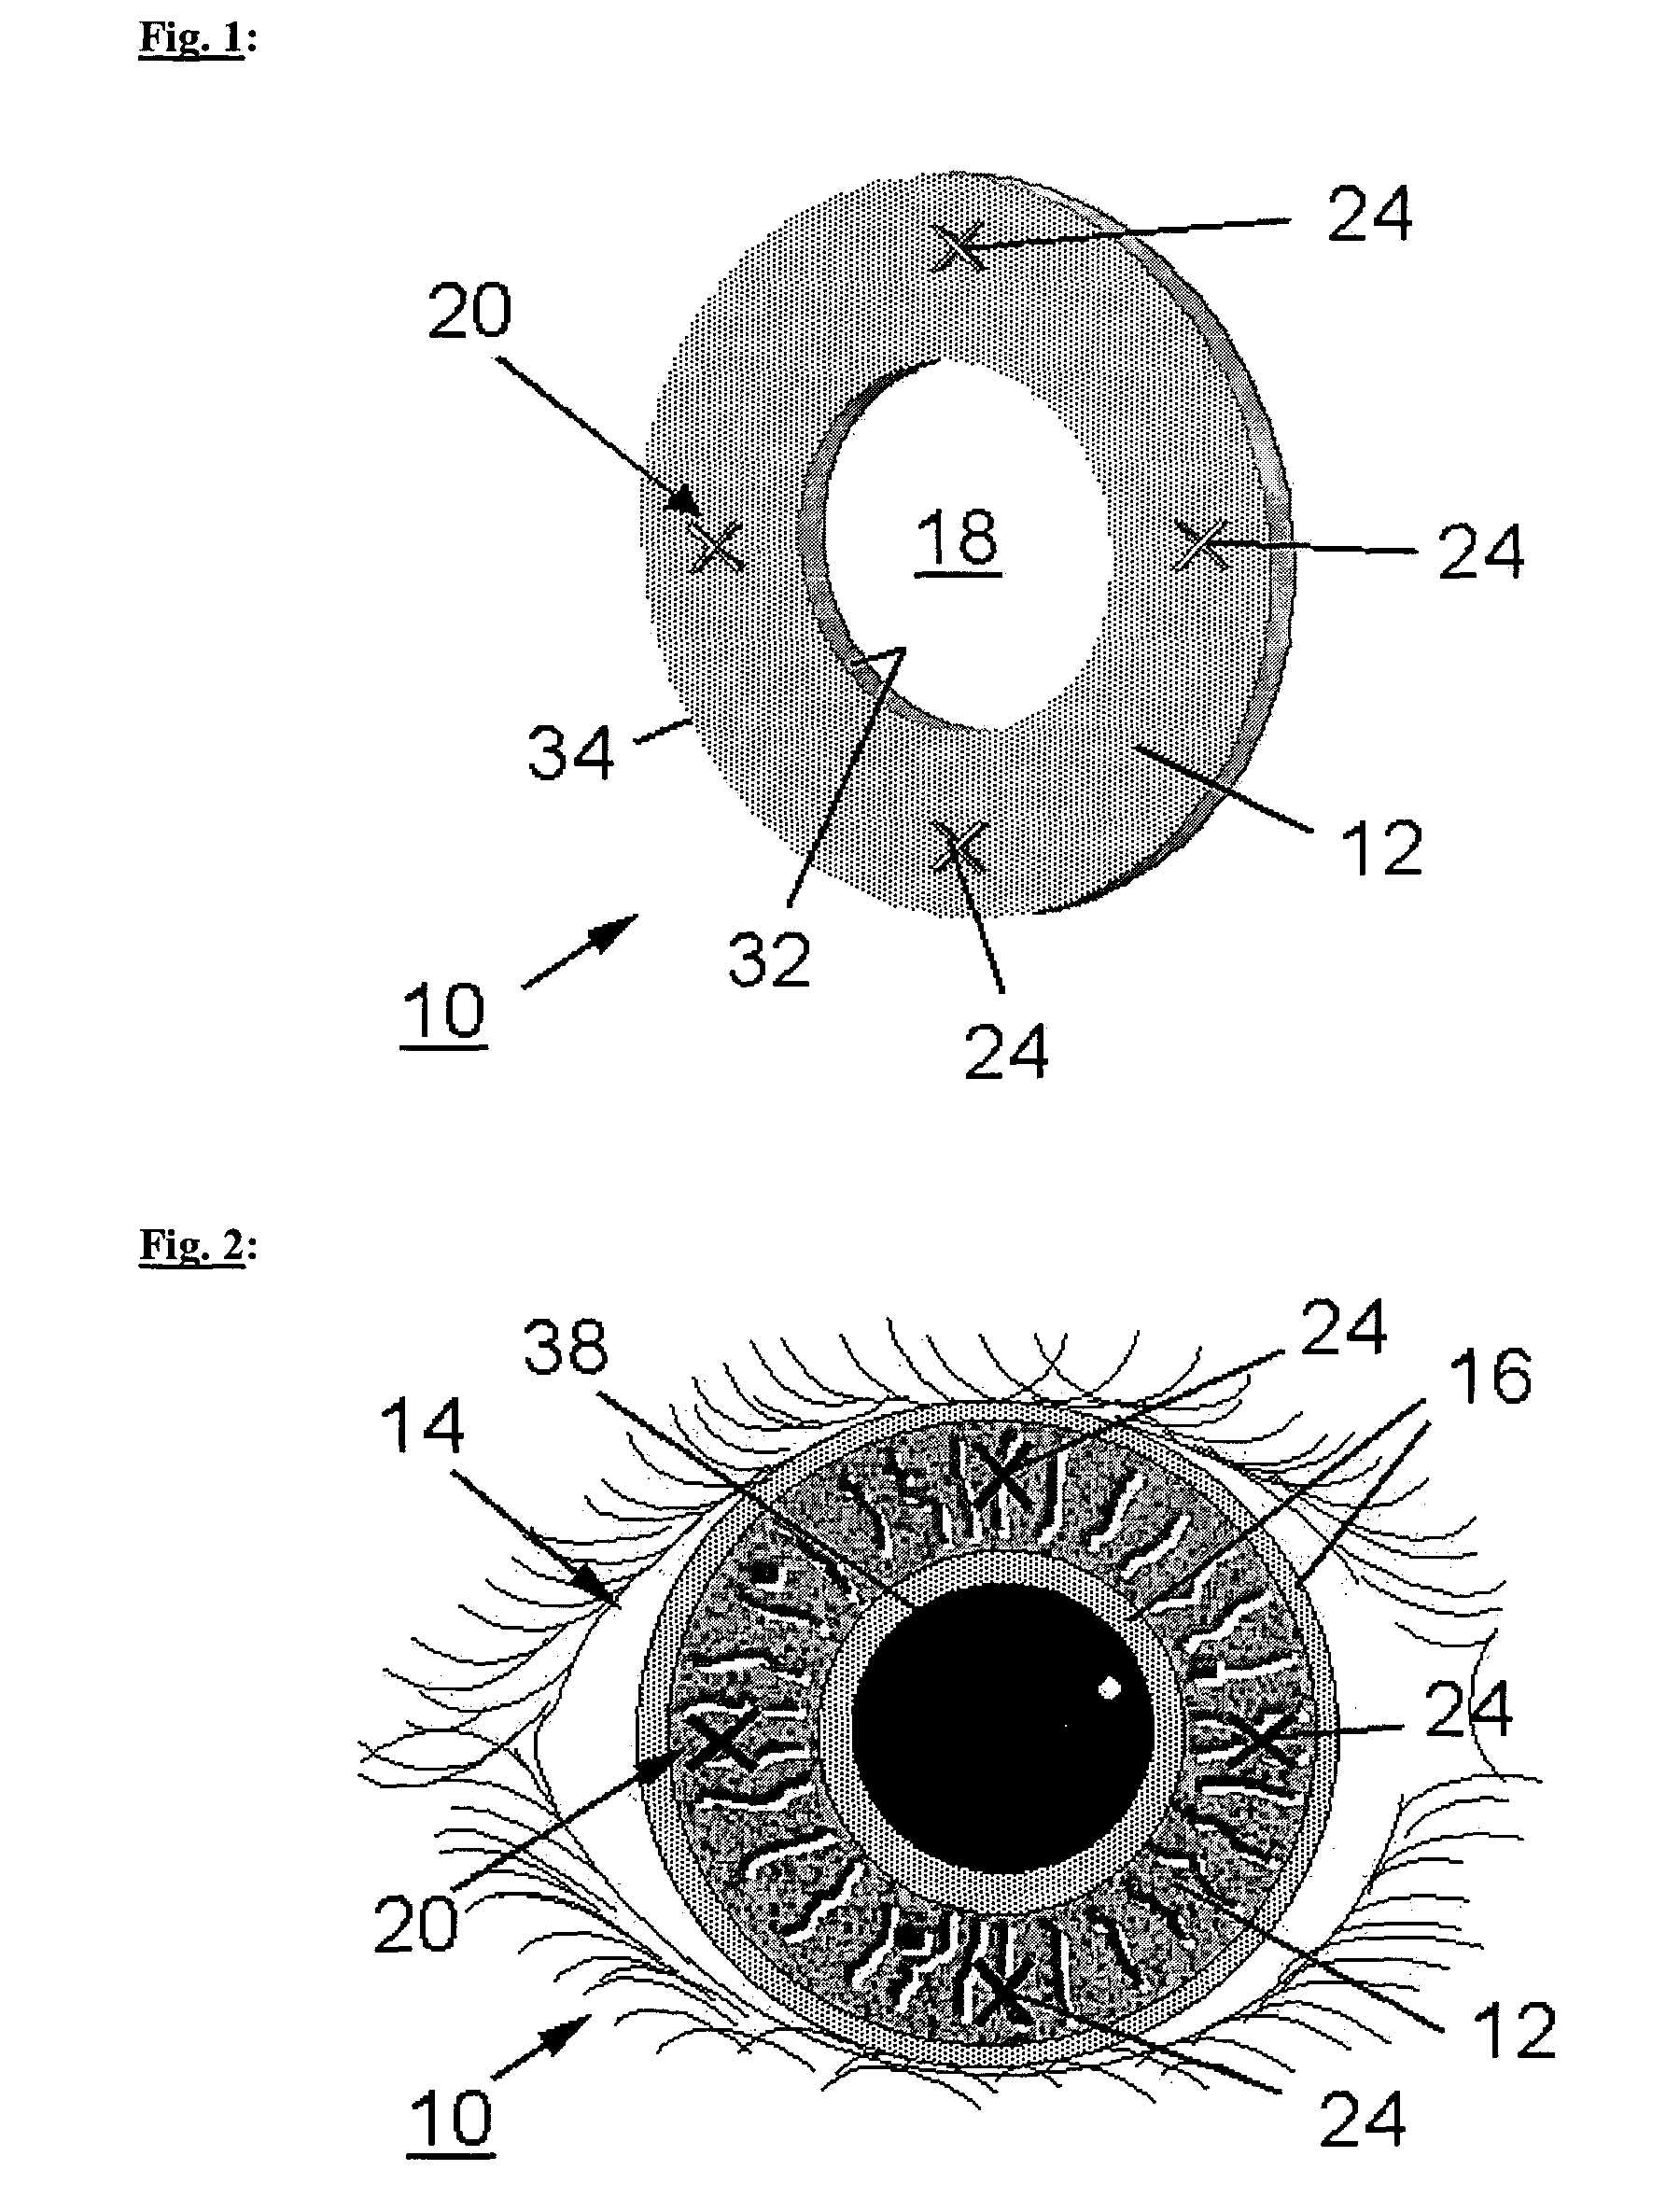 Implant for altering the iris color and method of locating and fixing an implant for altering the iris color